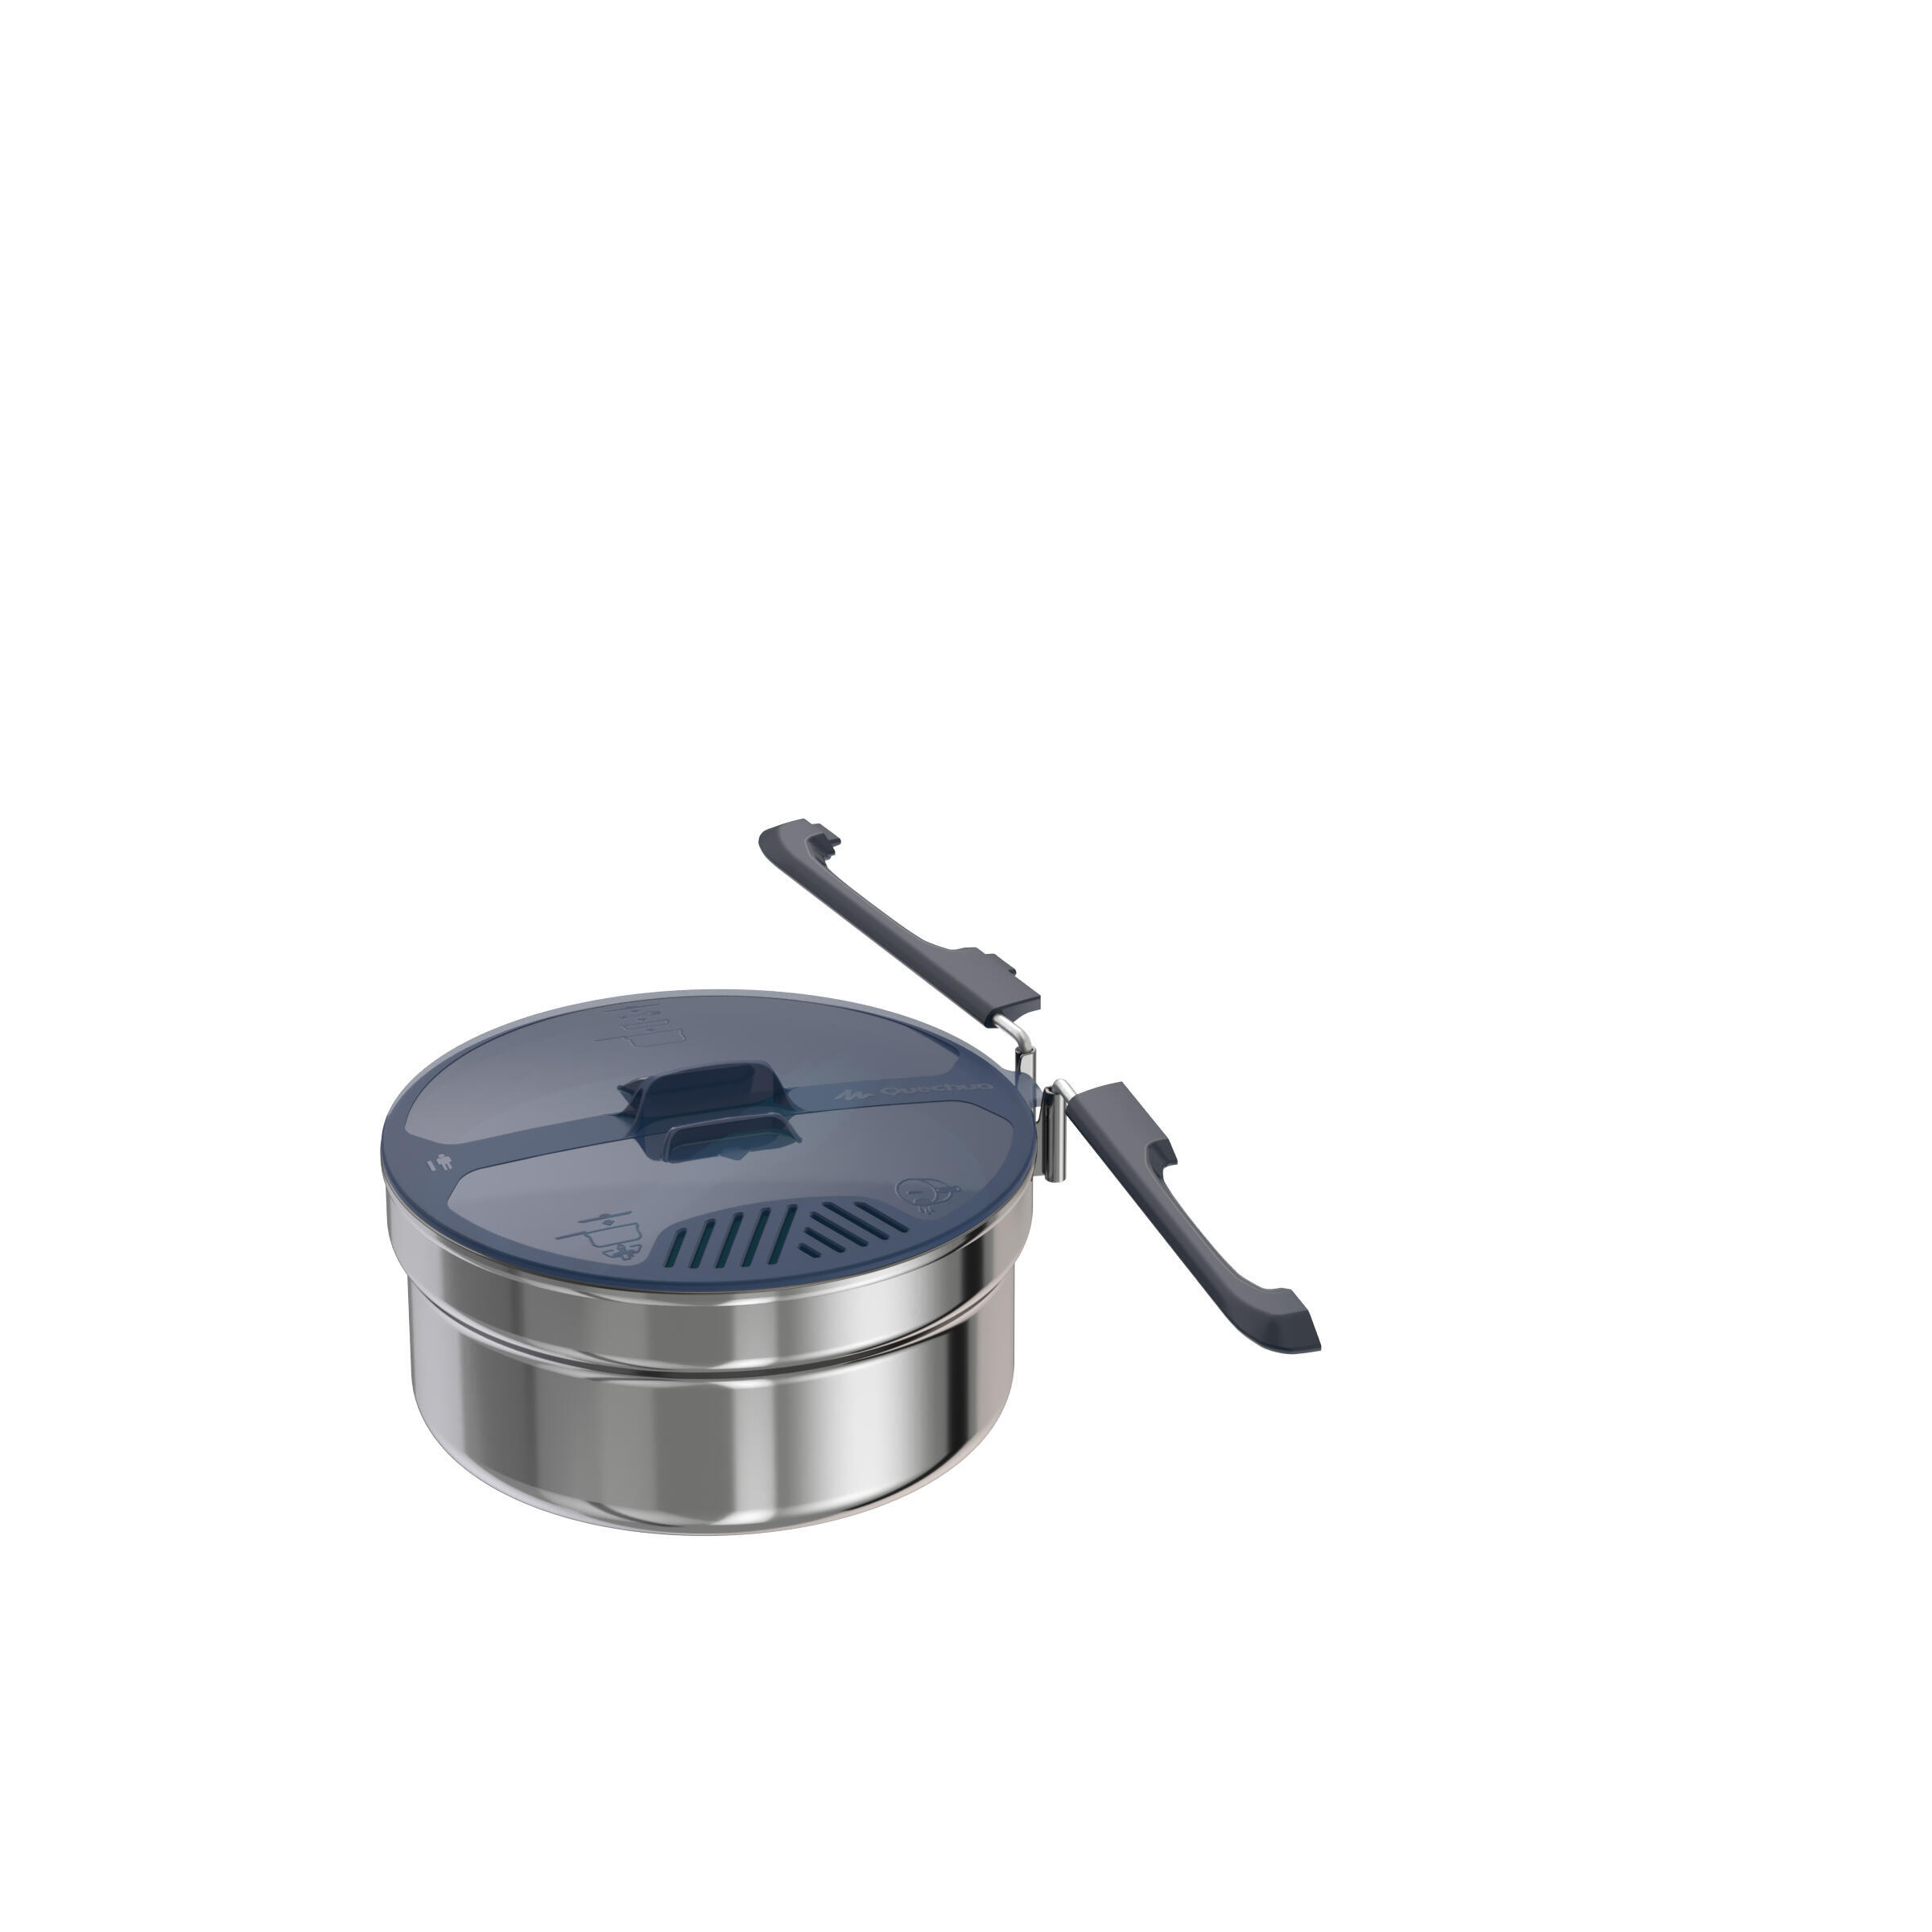 Stainless Steel Camping Cook Set - 1.1L 5/9